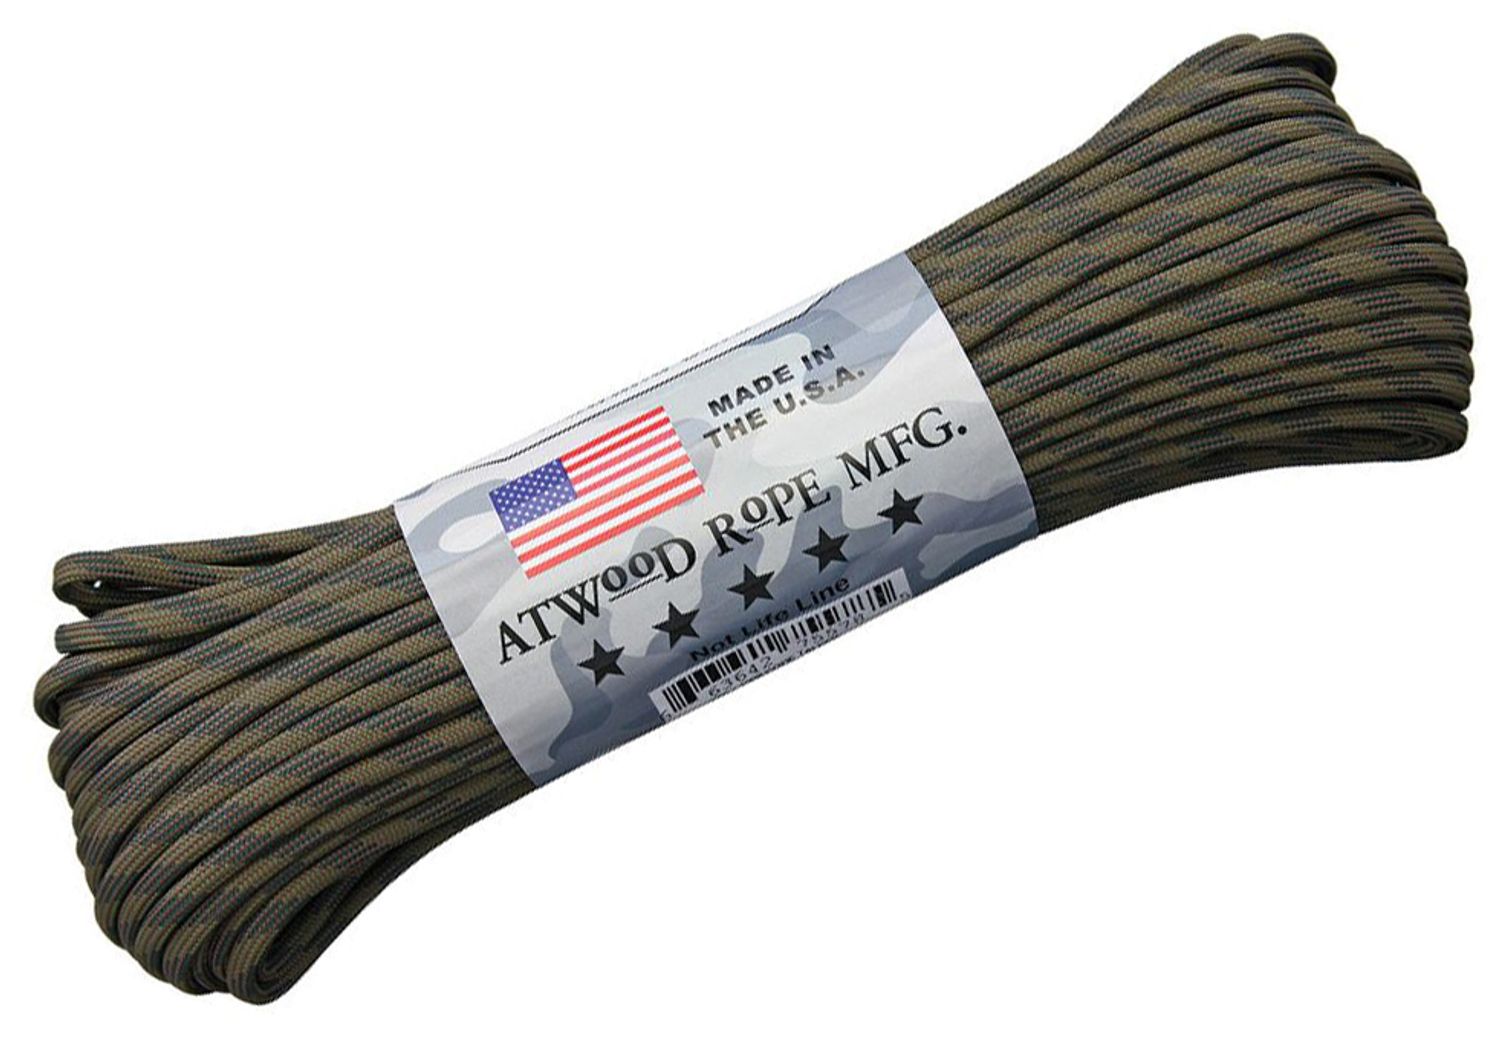 Atwood Rope 550 Paracord, Code Talker, 100 Feet - KnifeCenter